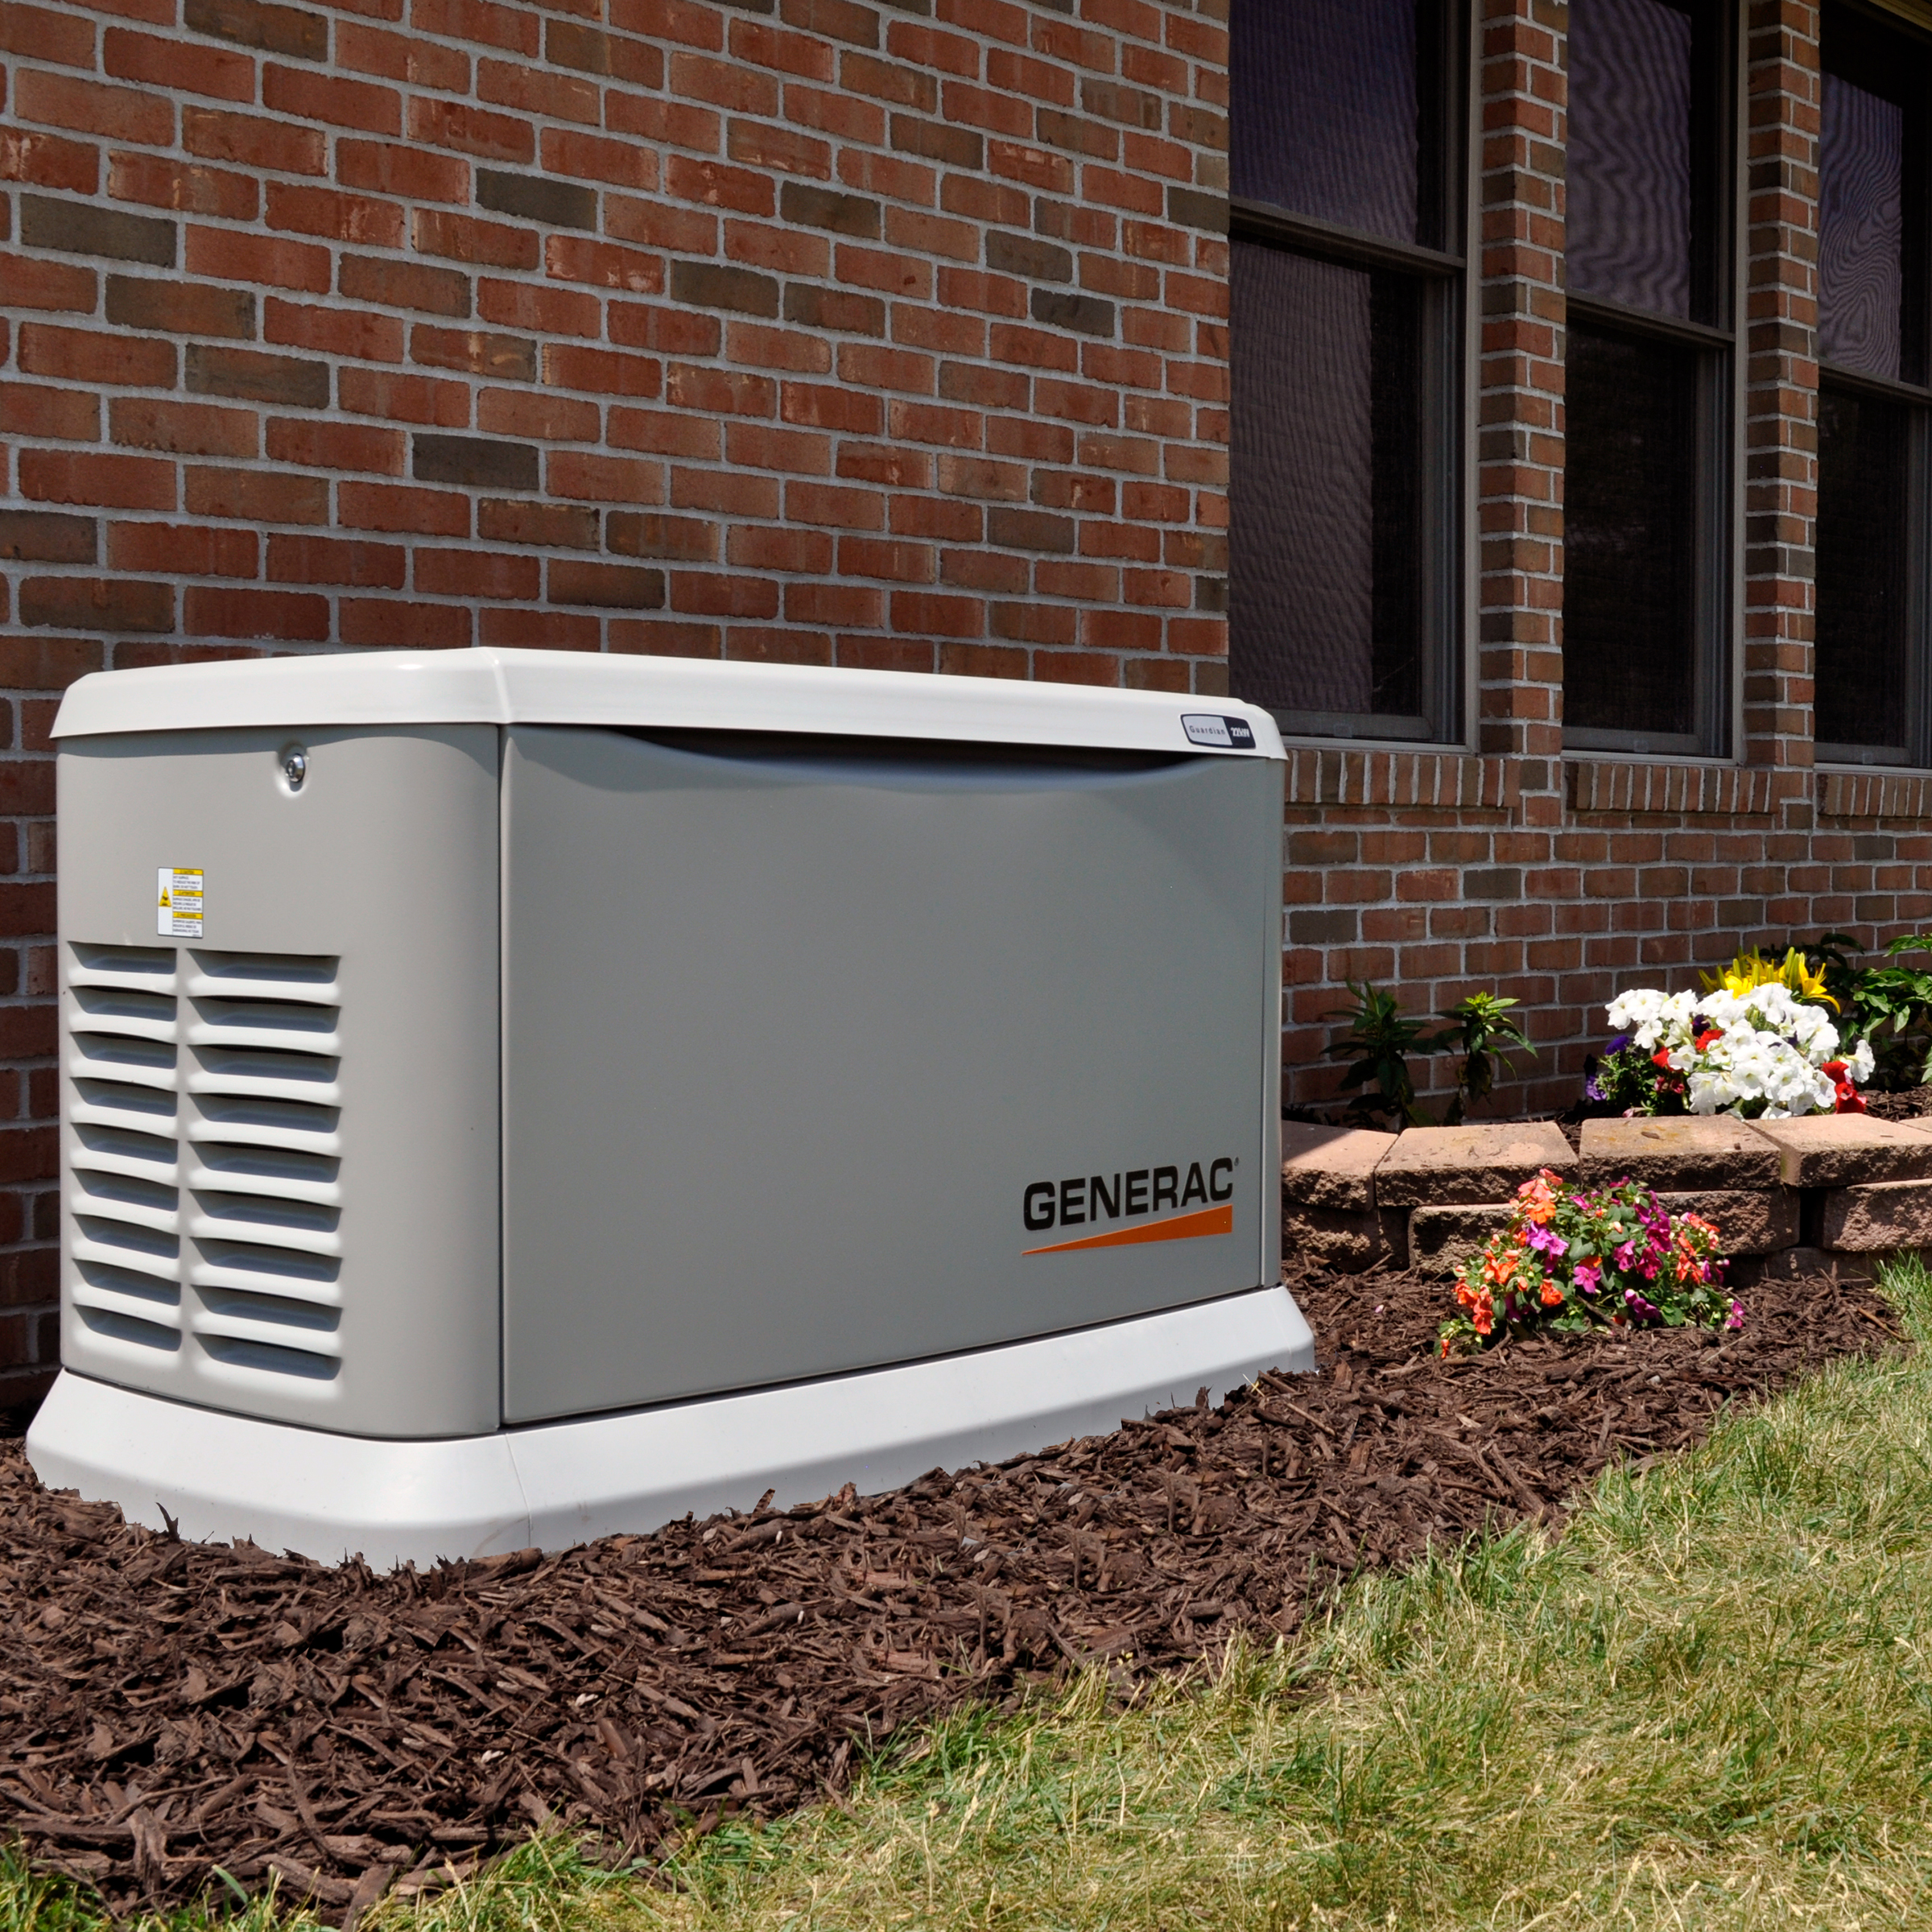 The Best Locations To Install Your Standby Generator